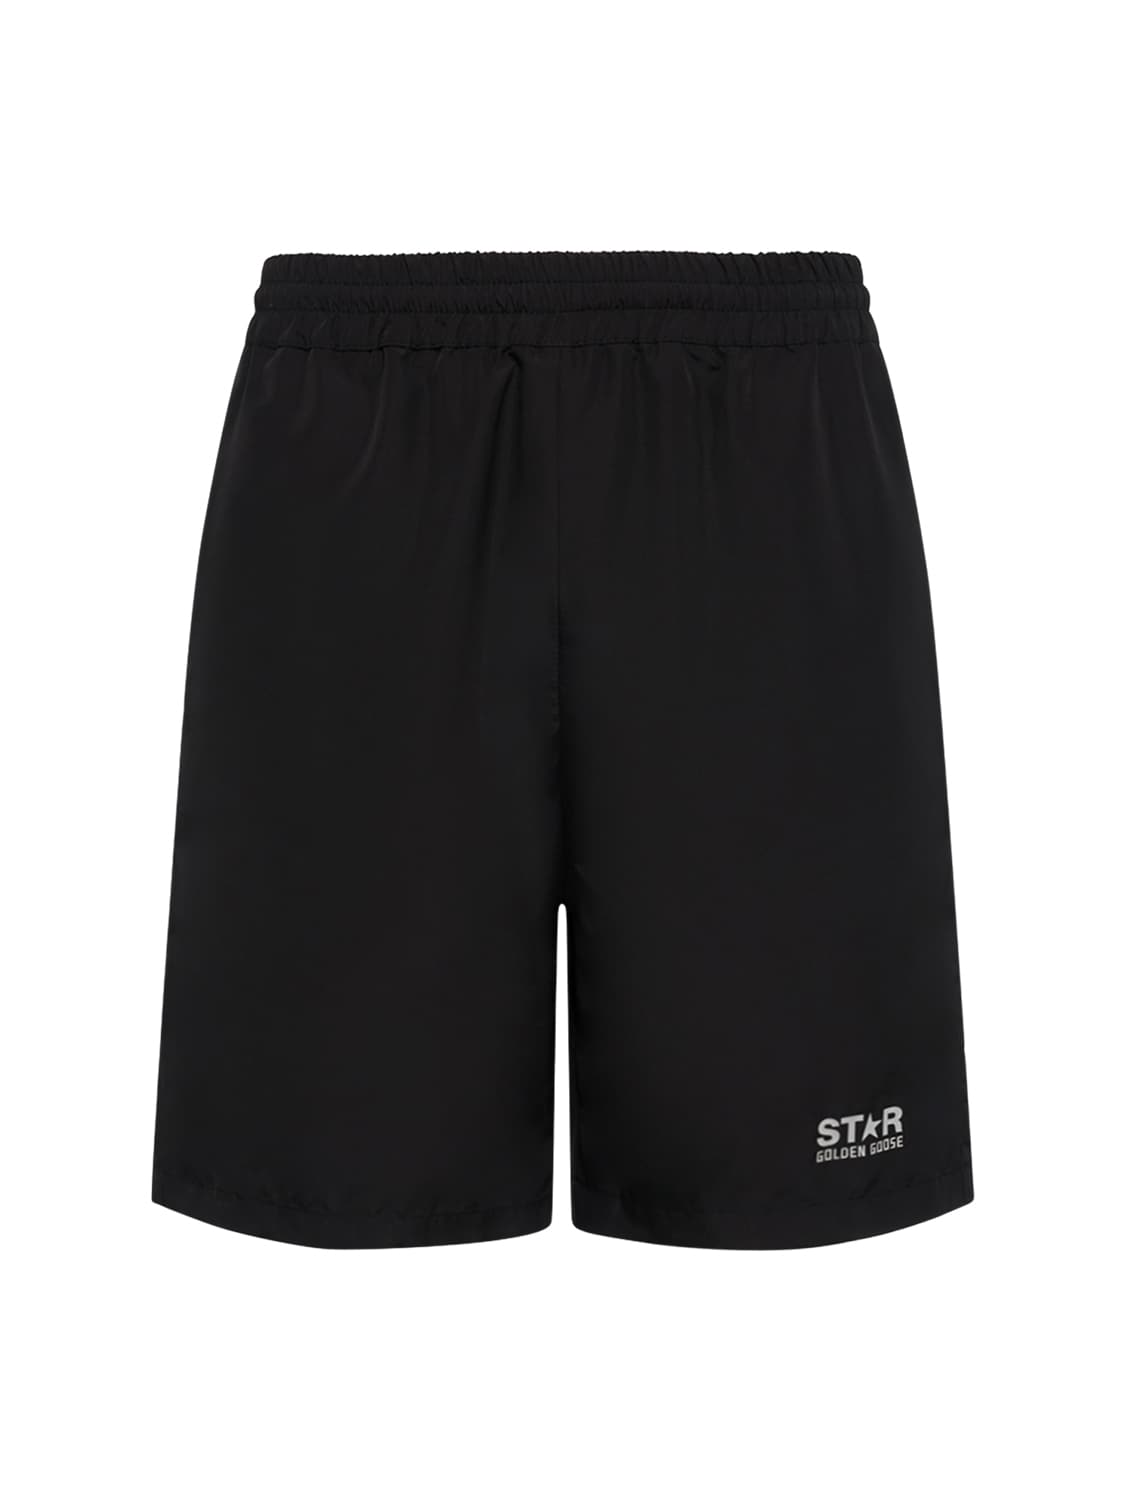 Image of Star Diego Technical Boxing Shorts